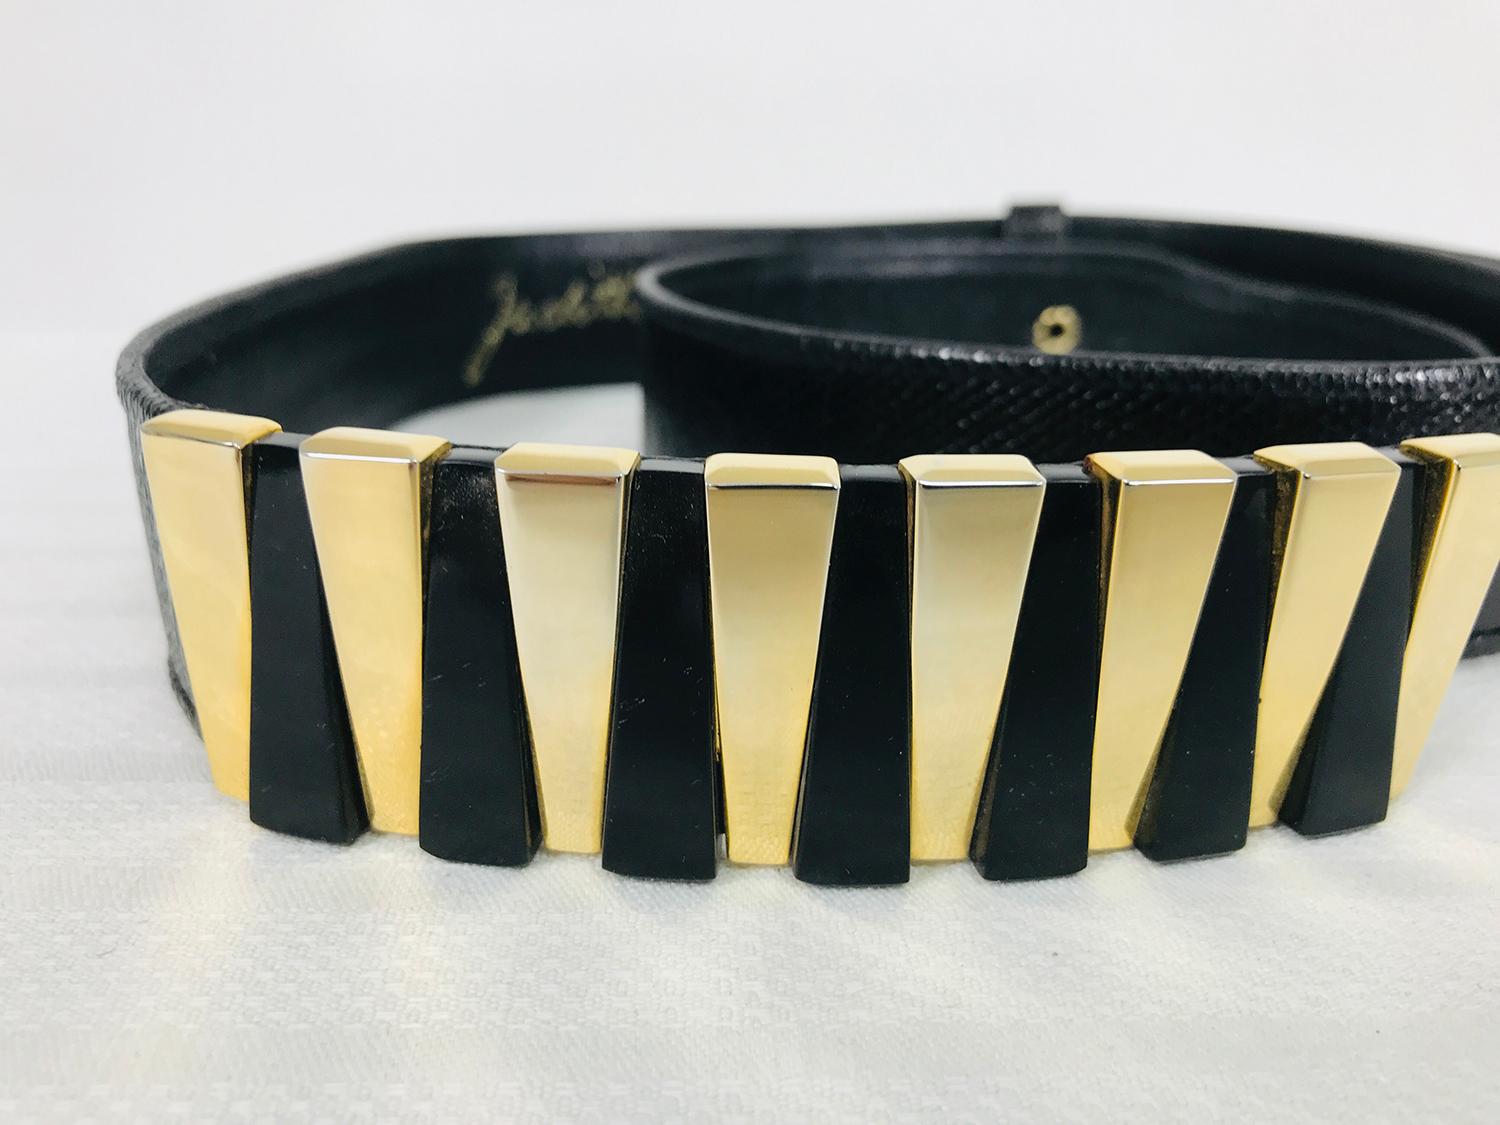 Judith Leiber black Lucite & gold metal buckle, black karung lizard adjustable belt. The belt is black karung lizard and slightly contoured, it adjusts by sliding. The buckle is long and has a prong for closure there is a single hole of gold metal.